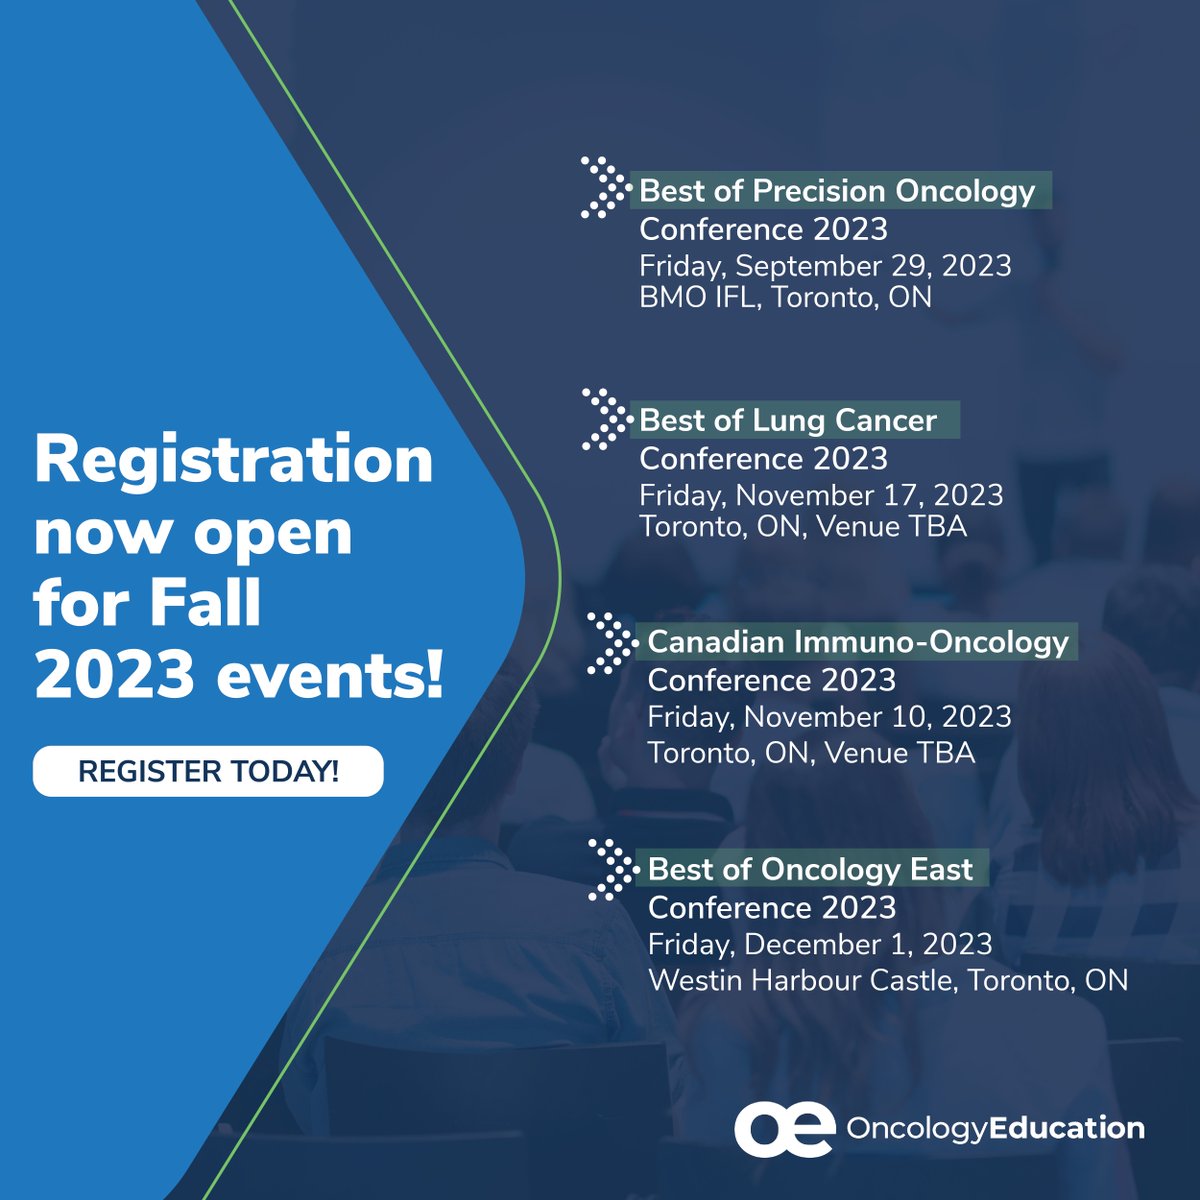 📆 Registration is now open for our Fall 2023 flagship events! Join us to hear a summary of the most significant advances in cancer treatment. Space fills up fast – register today: ow.ly/EePb50PE2Ee

#OncEd #OncologyEvents #BestofPrecision #BestofLung #OncologyEast